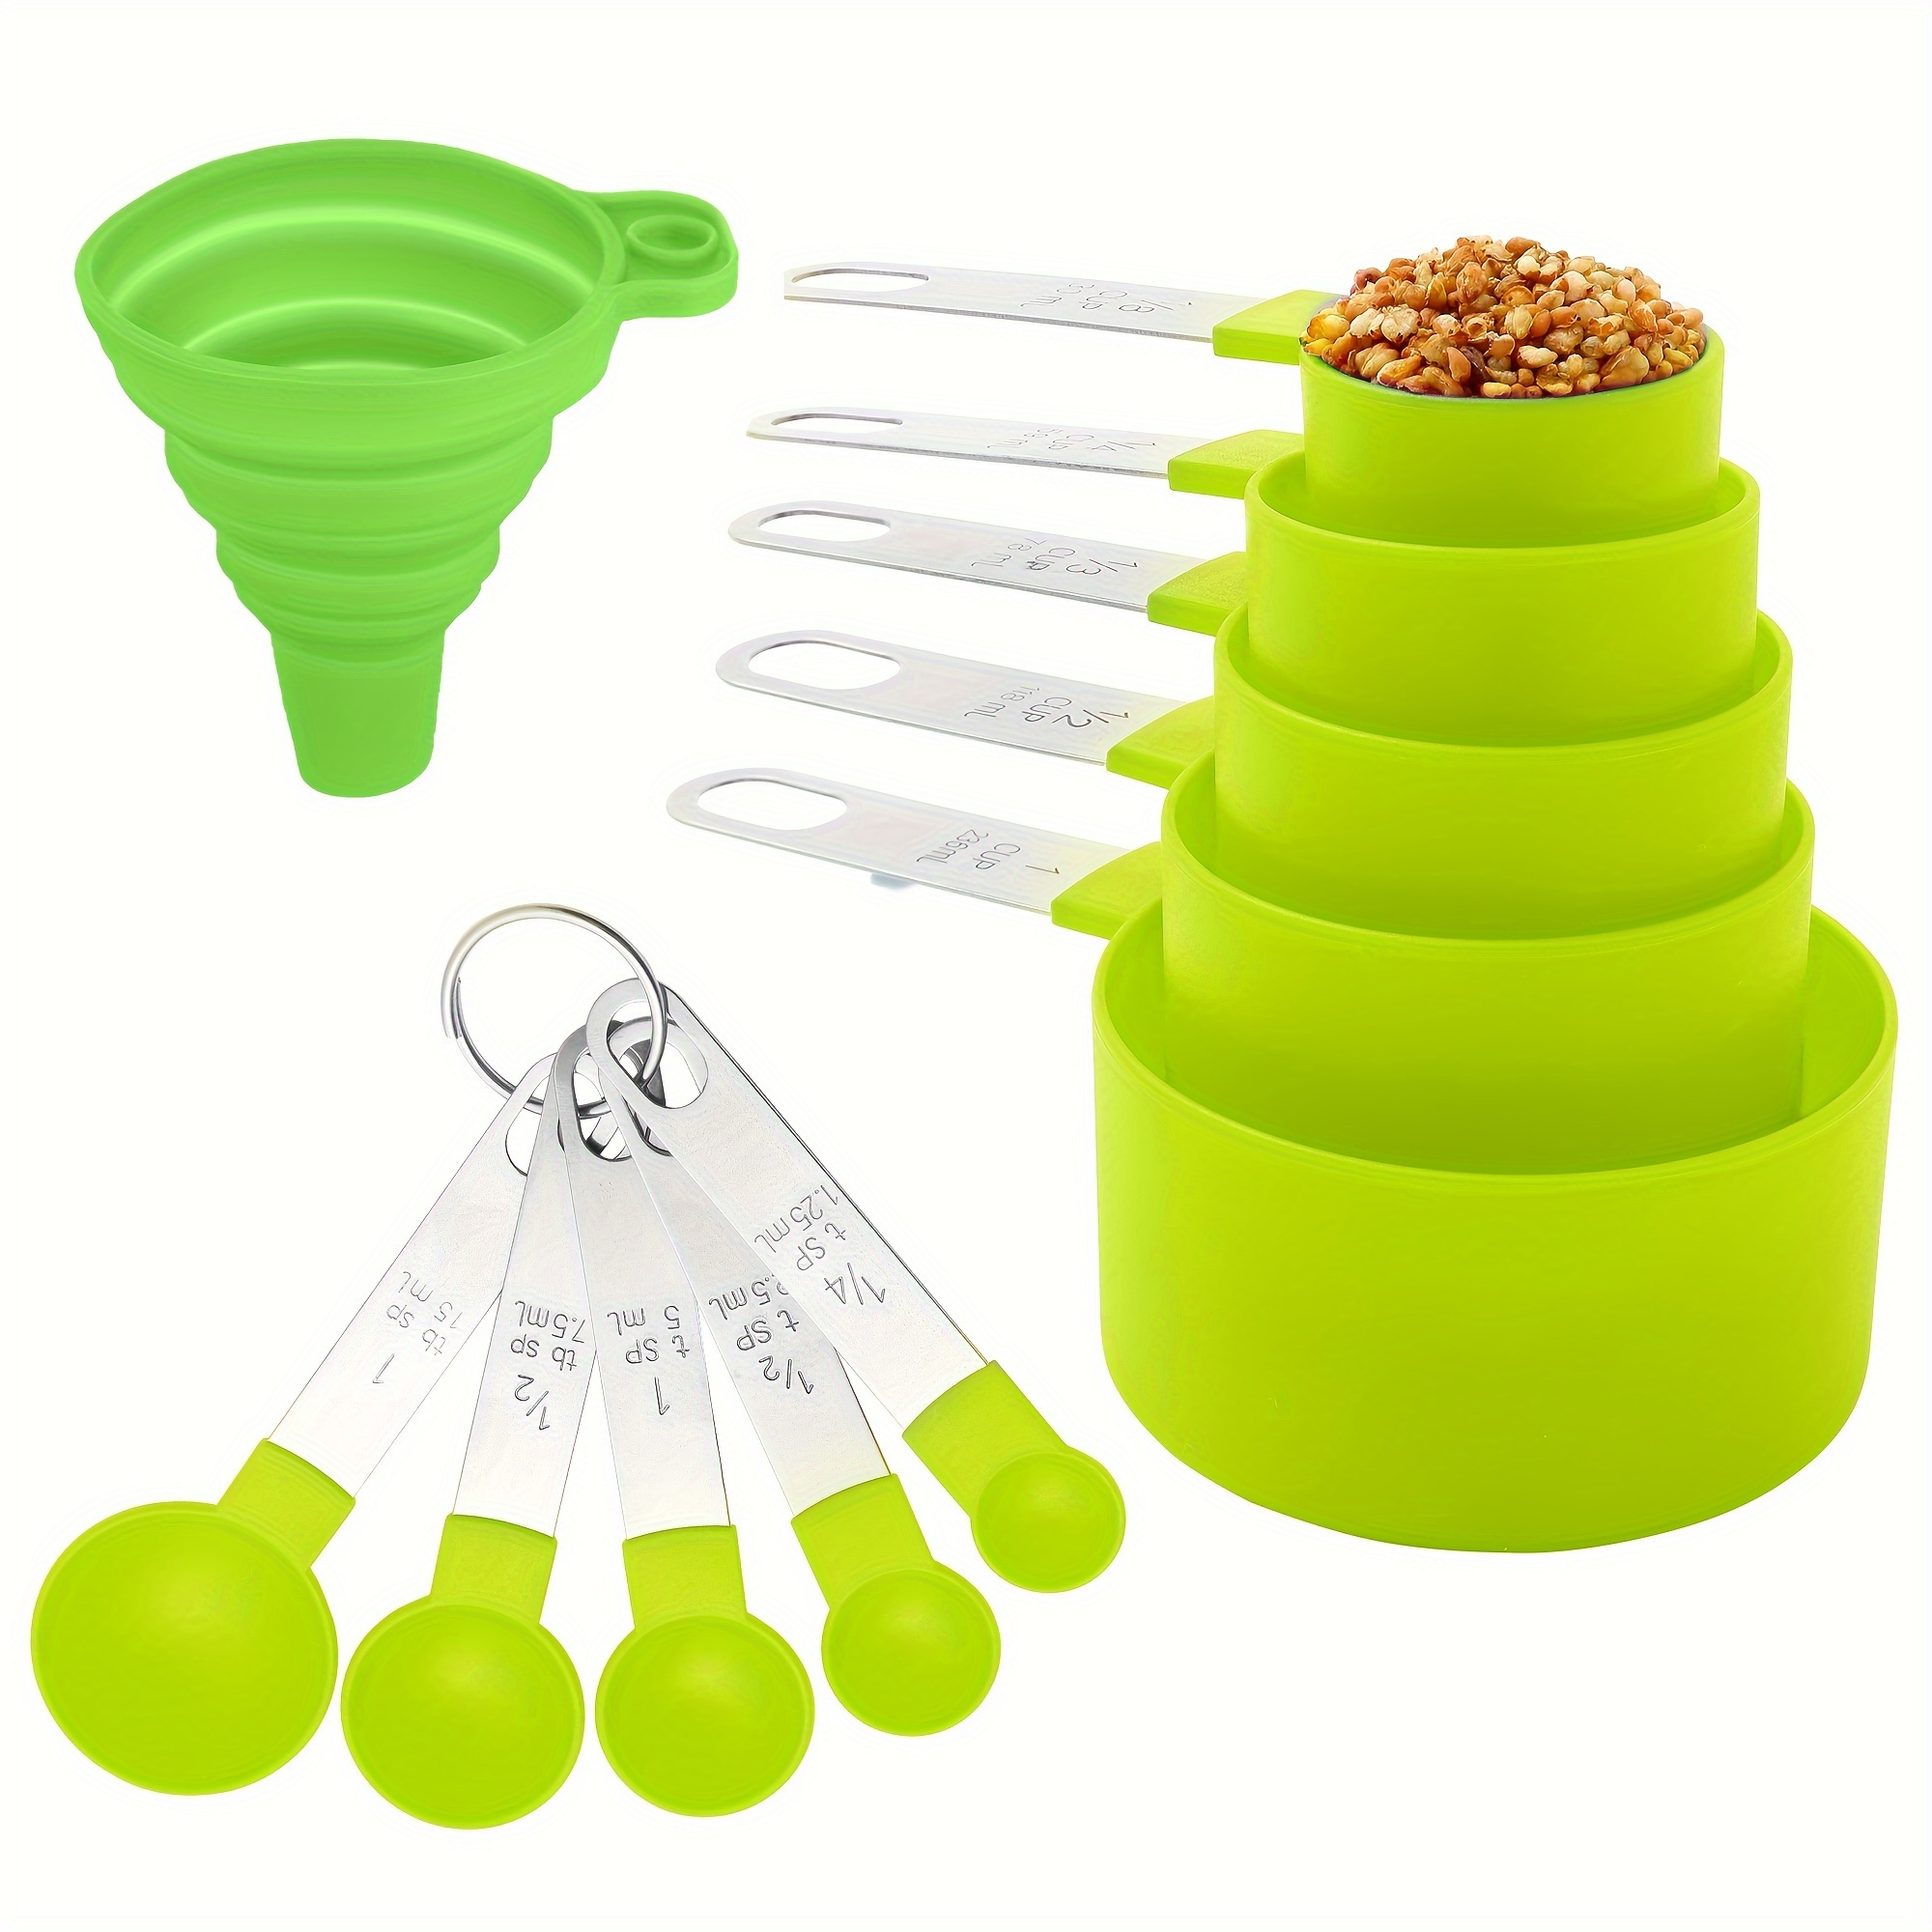 10 pcs plastic measuring cups and